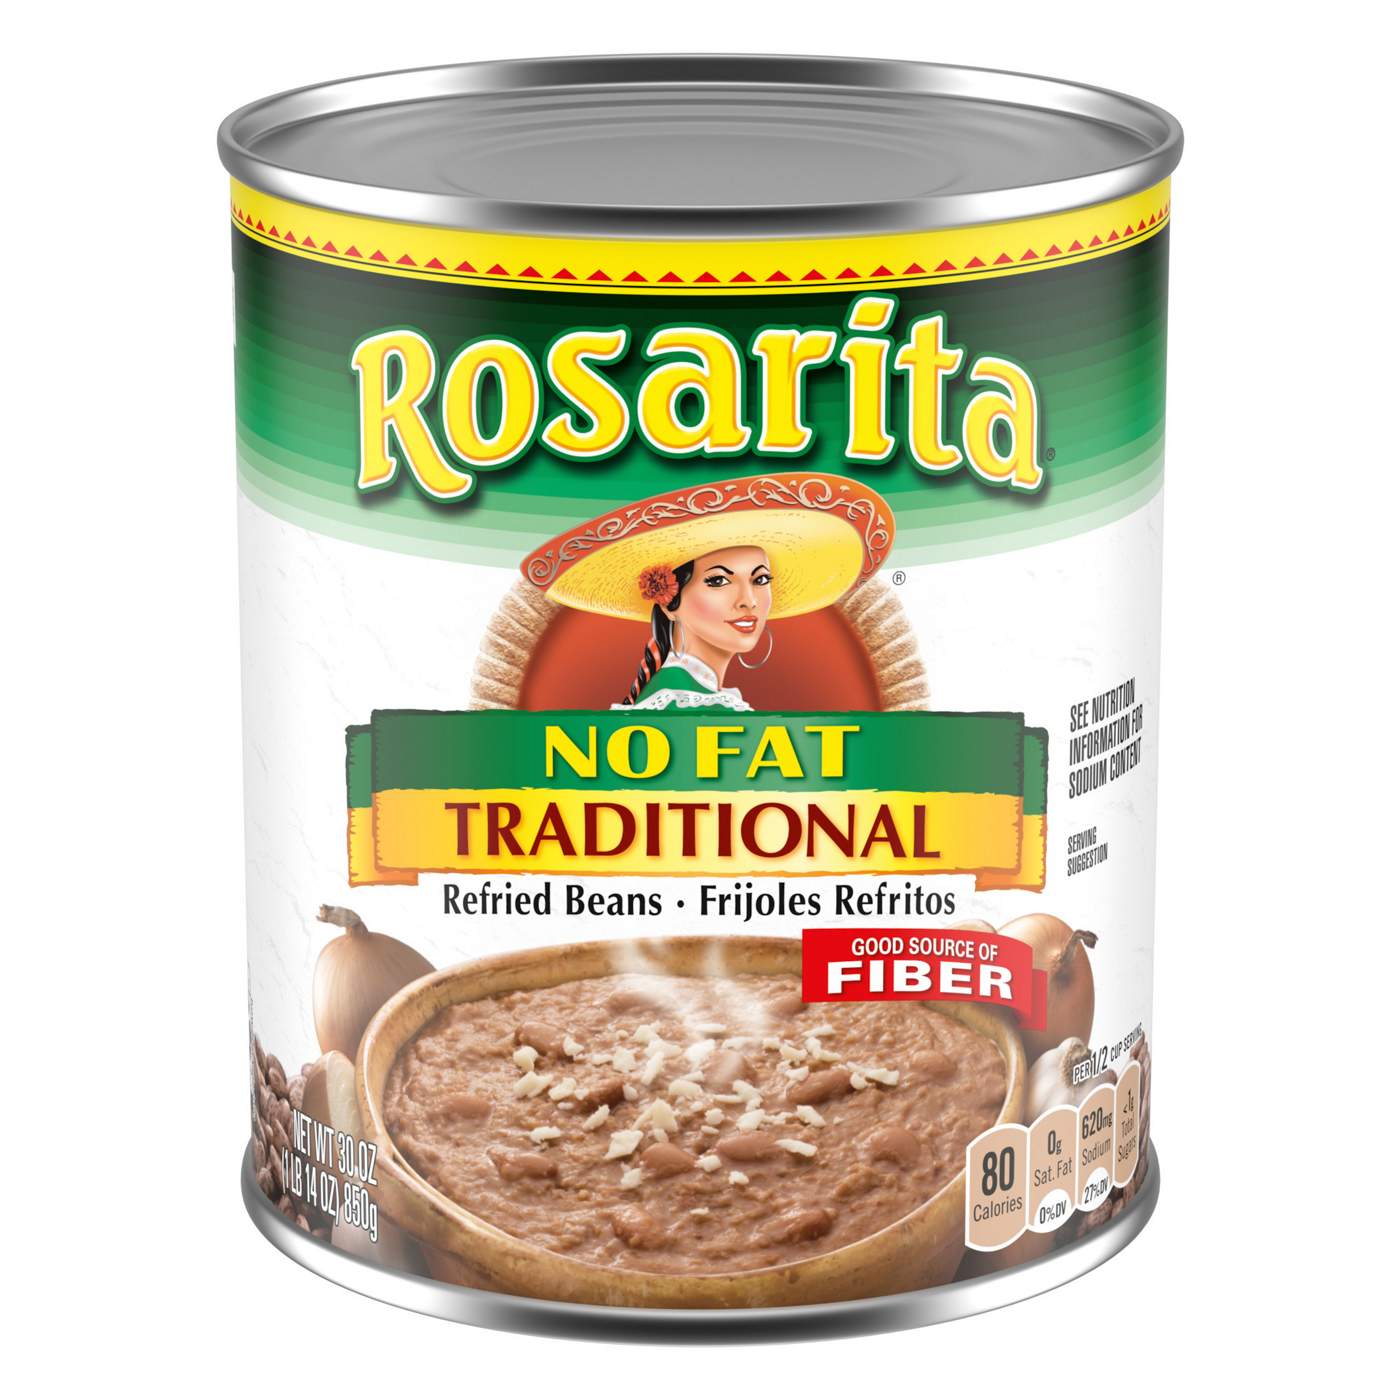 Rosarita No Fat Traditional Refried Beans; image 1 of 6